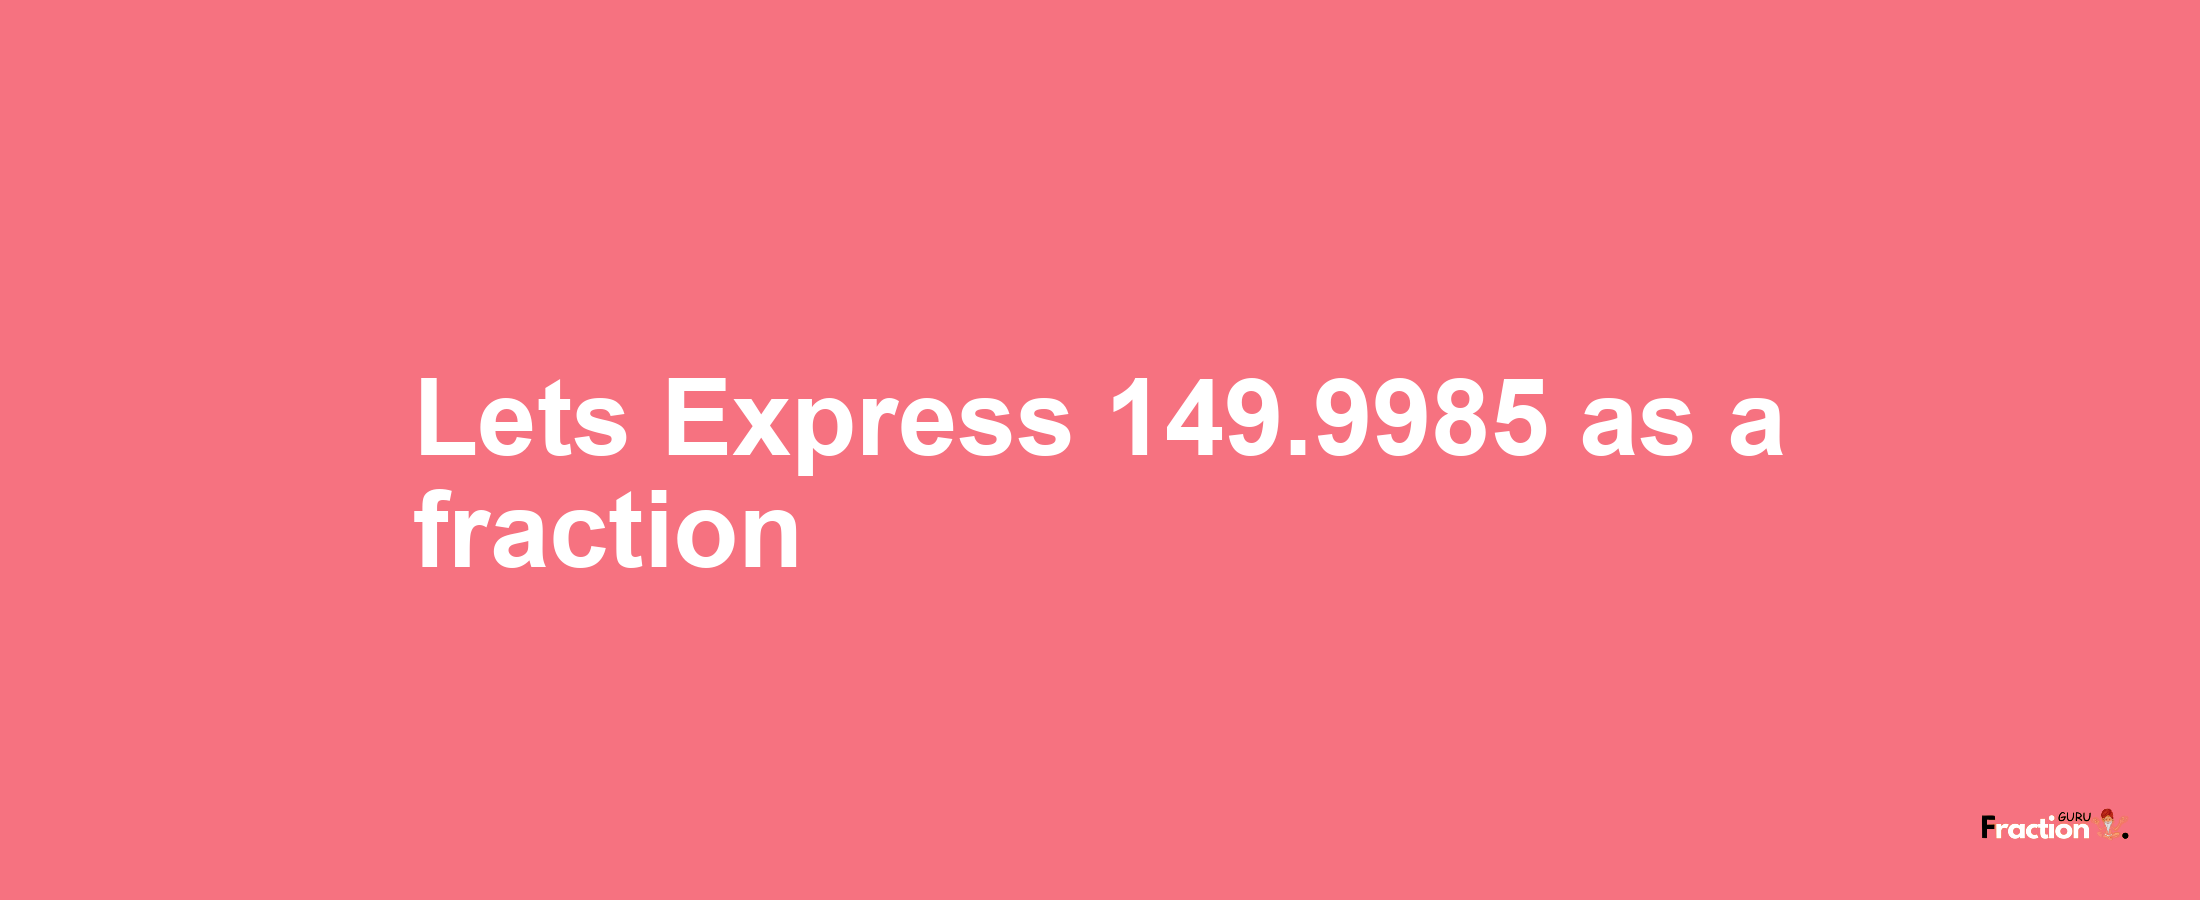 Lets Express 149.9985 as afraction